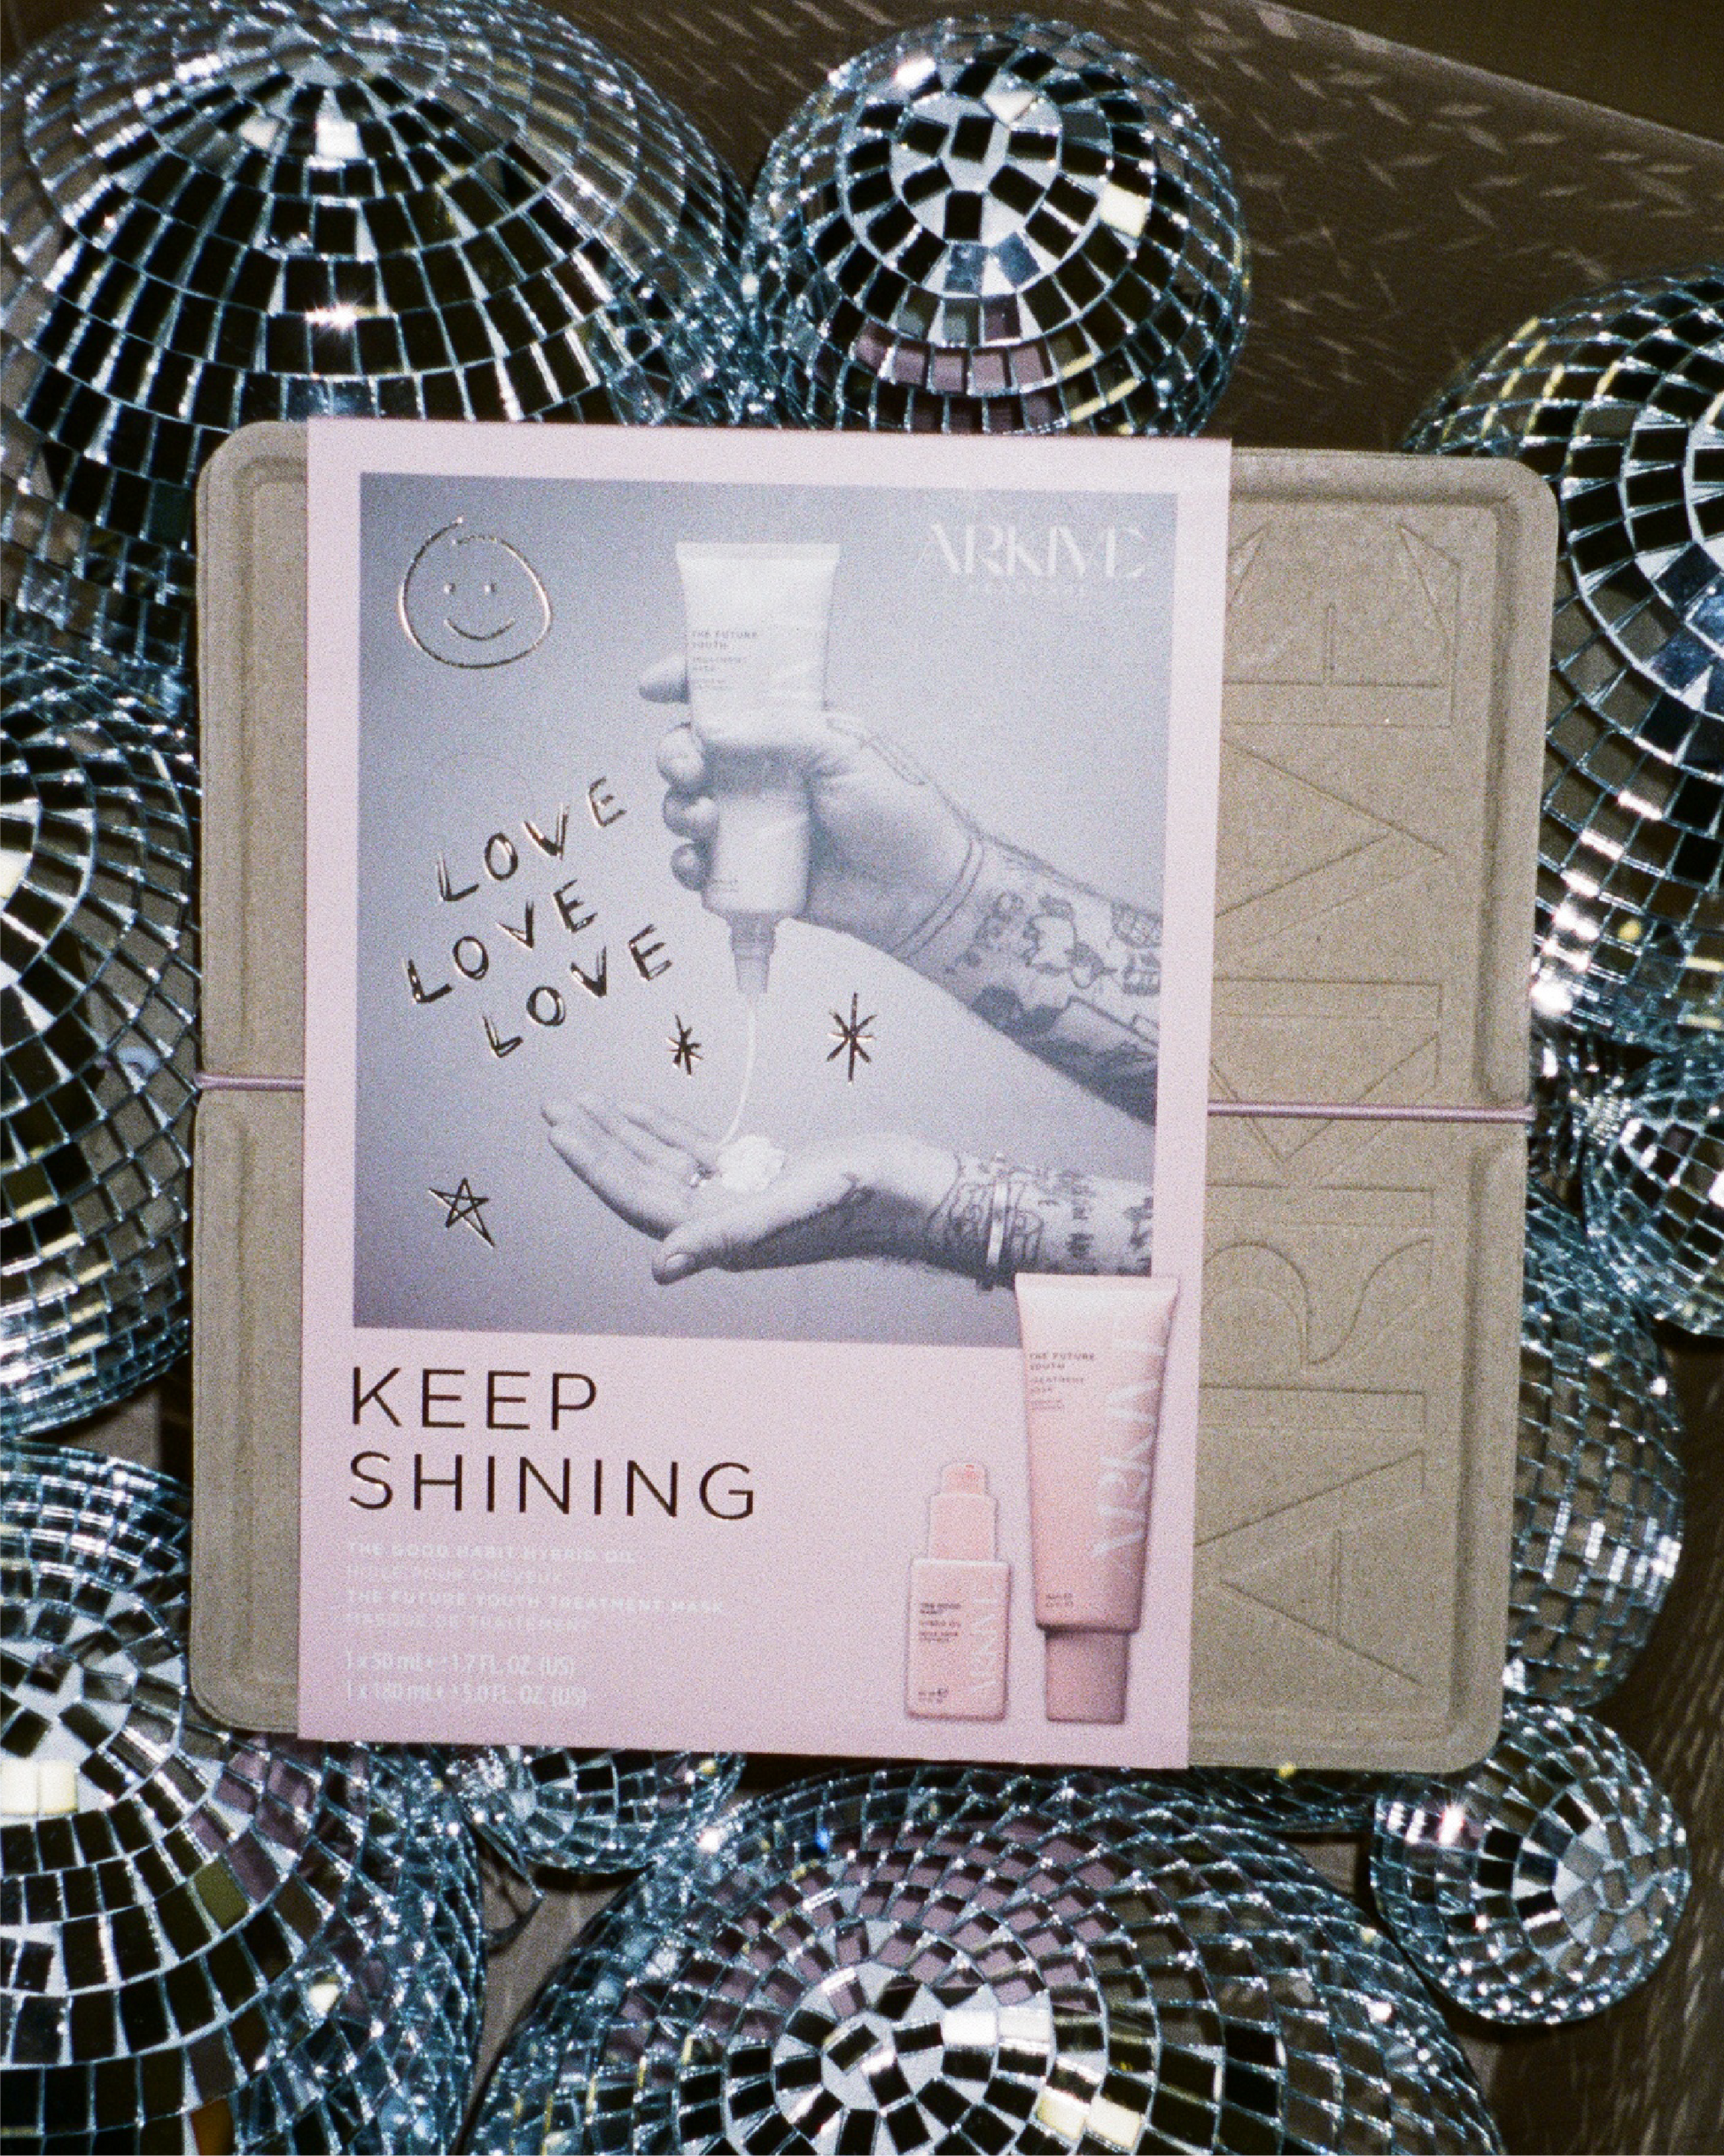 Arkive Keep Shining christmas gift set against a disco ball background